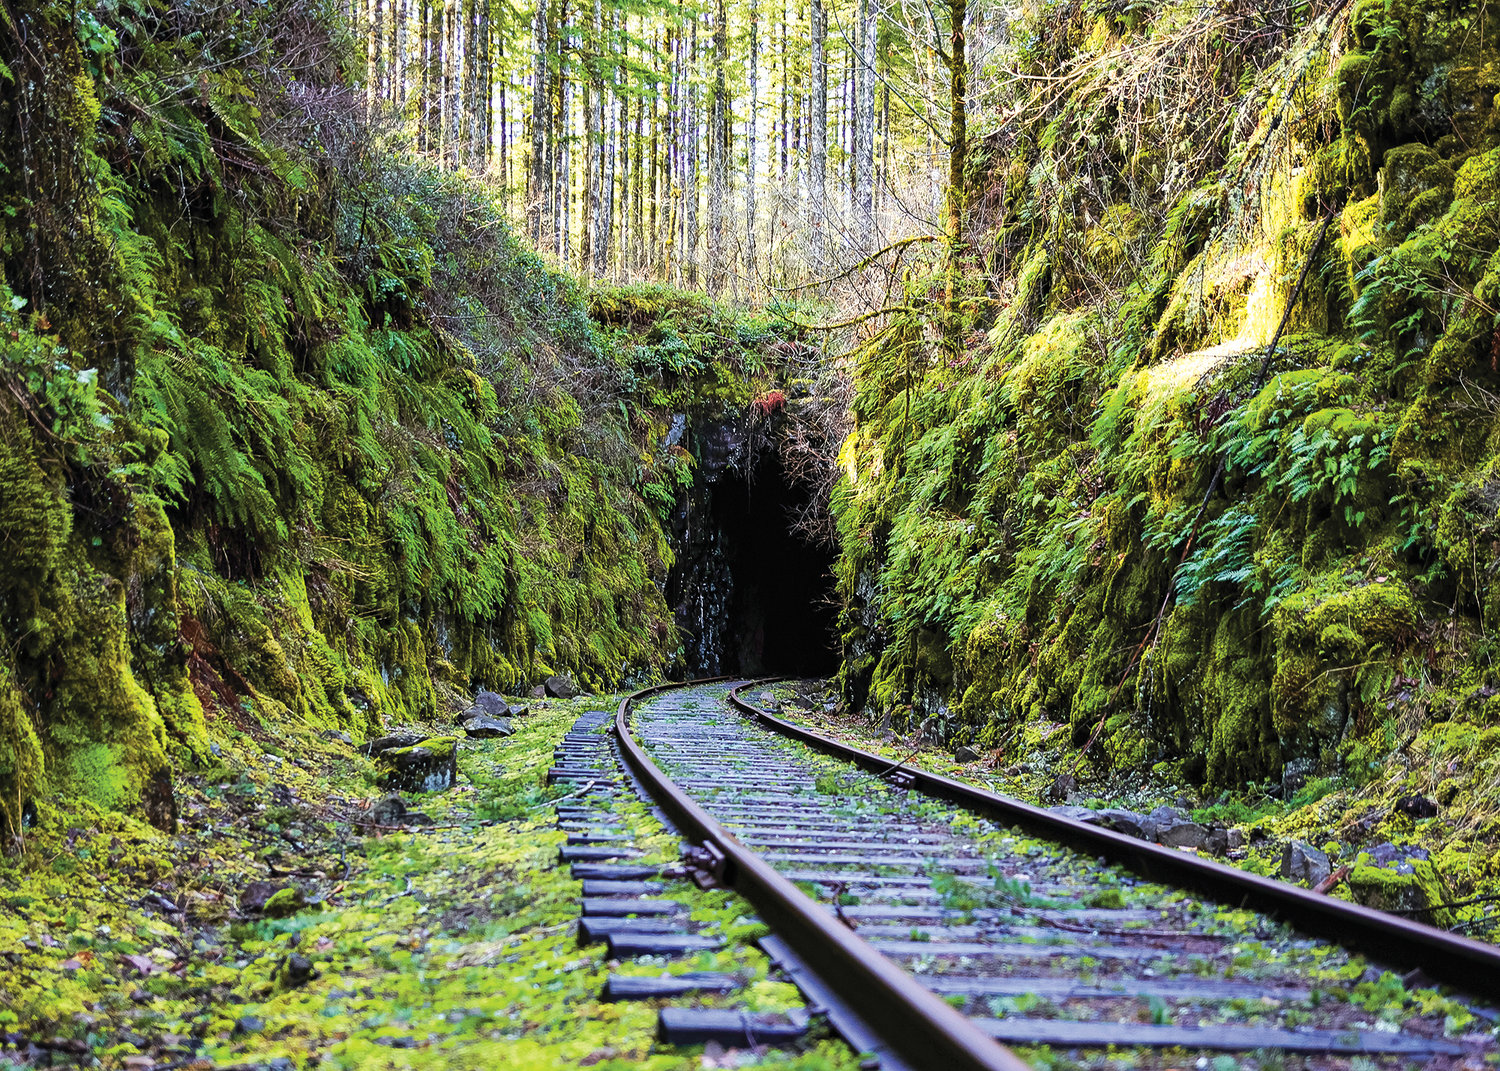 The railroad belonging to the Chelatchie Prairie Railroad enters a 300-foot long tunnel that was built from 1901 to 1903 near Moulton Falls Park in North Clark County on Tuesday, March 14.